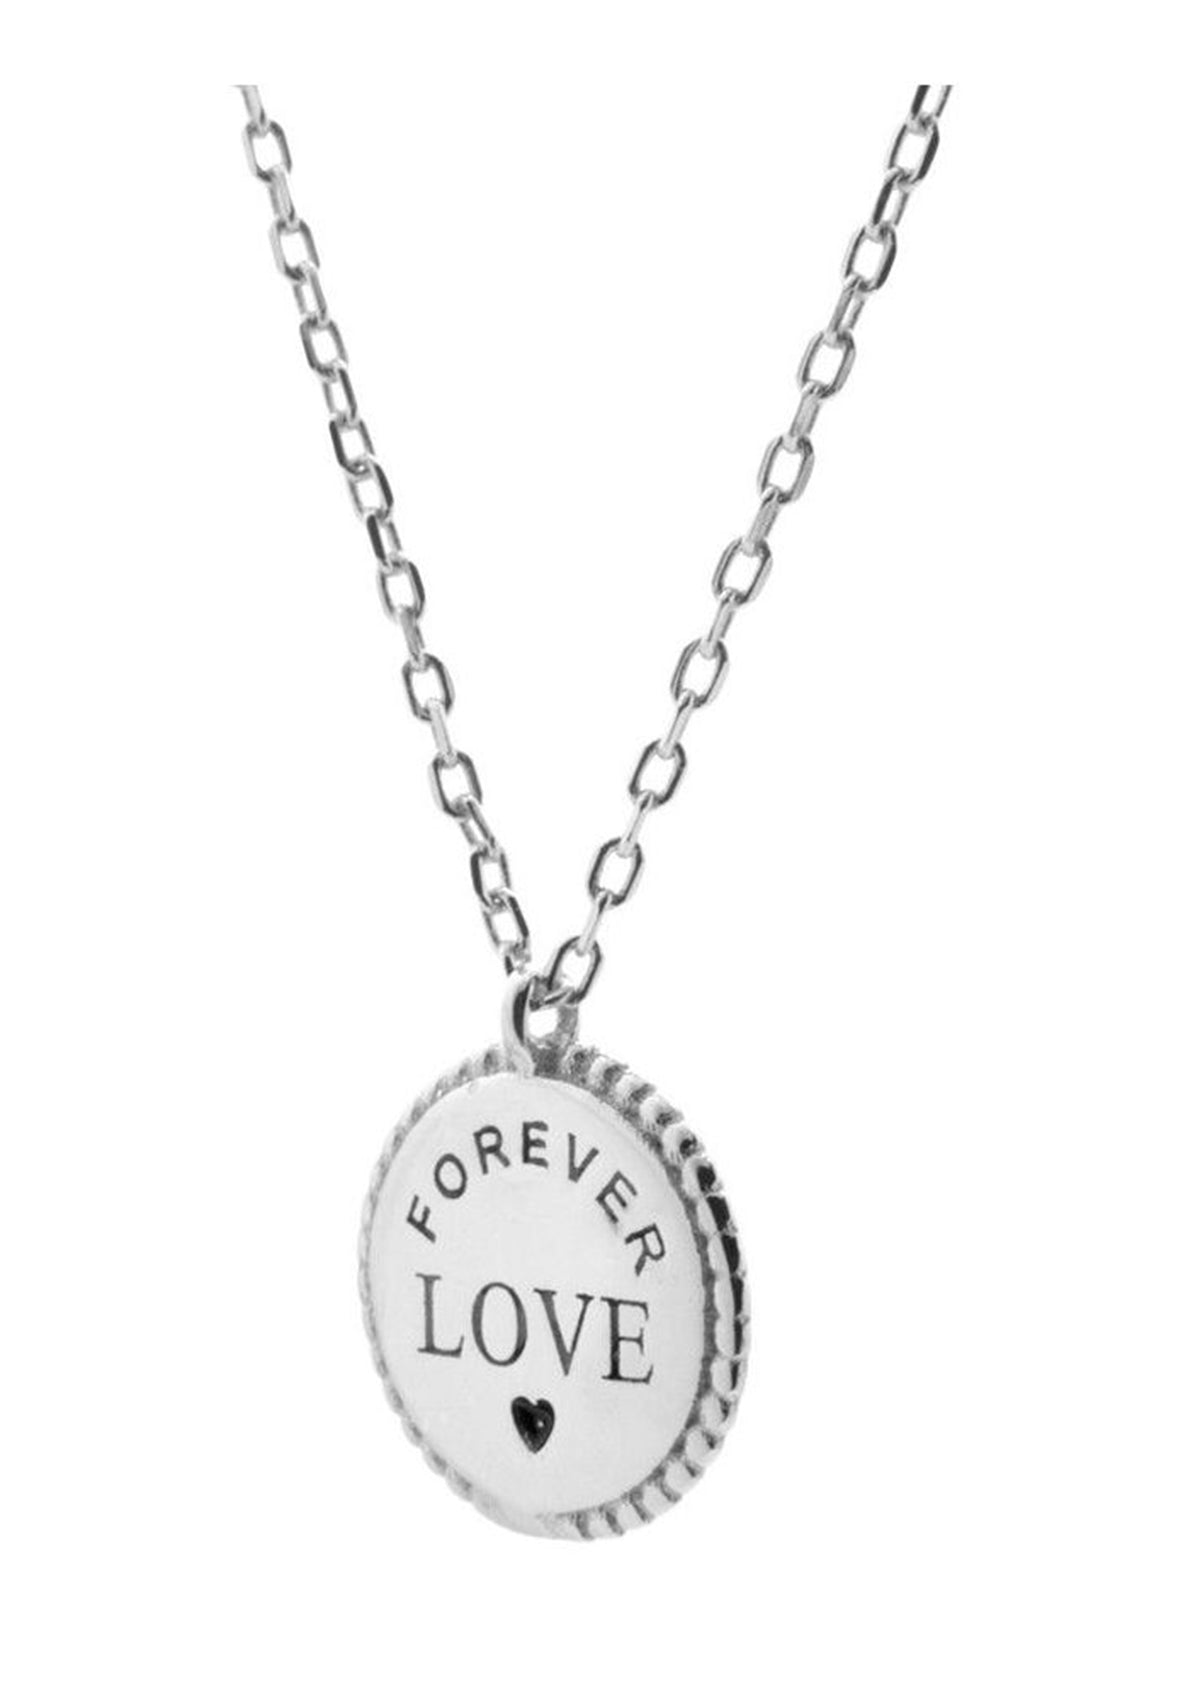 Forever Love Necklace | Black Book Fashion